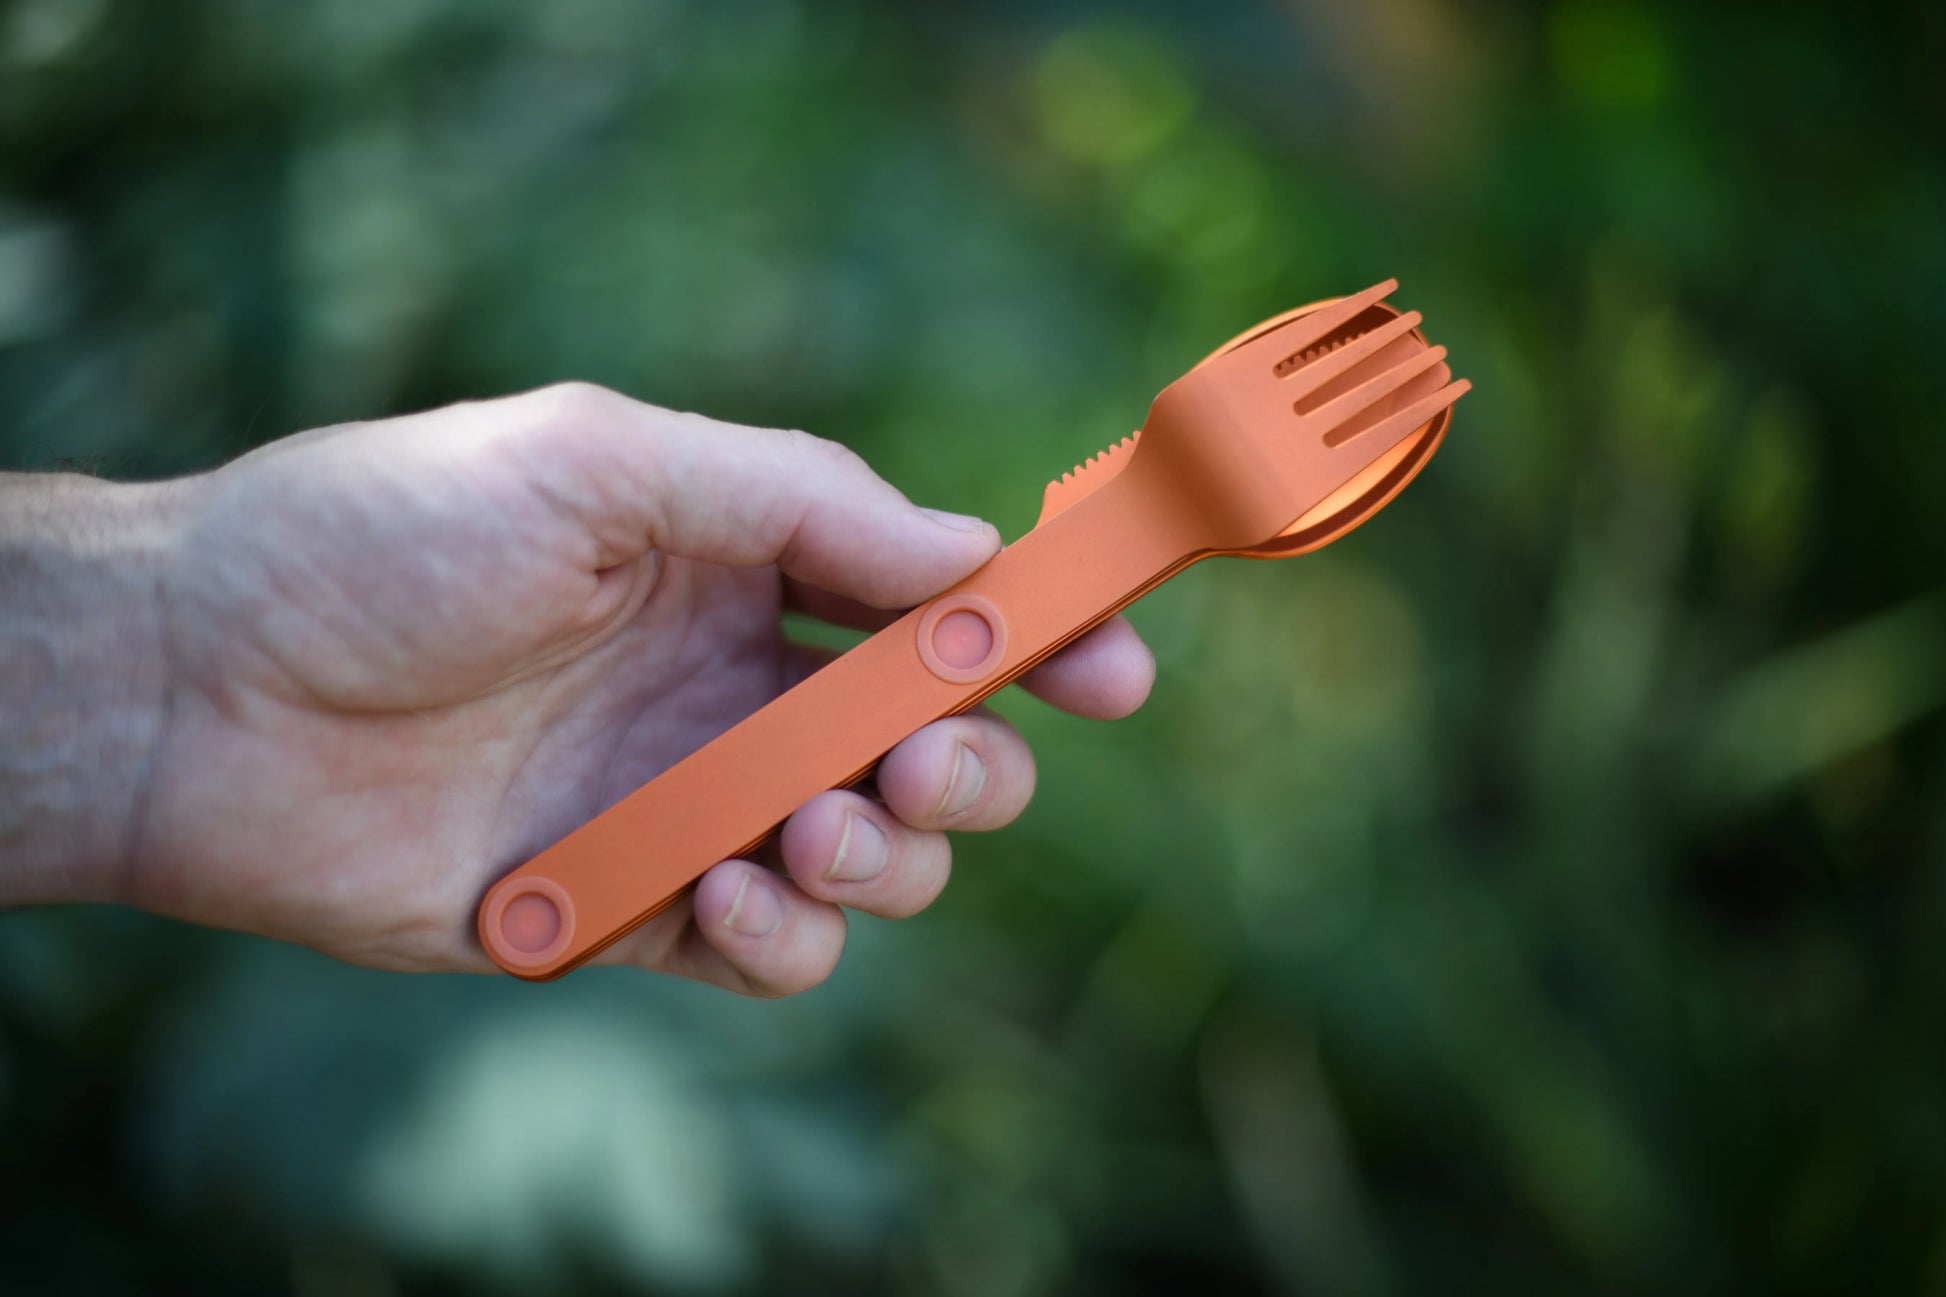 Hand holding an orange fork, spoon and knife connected.